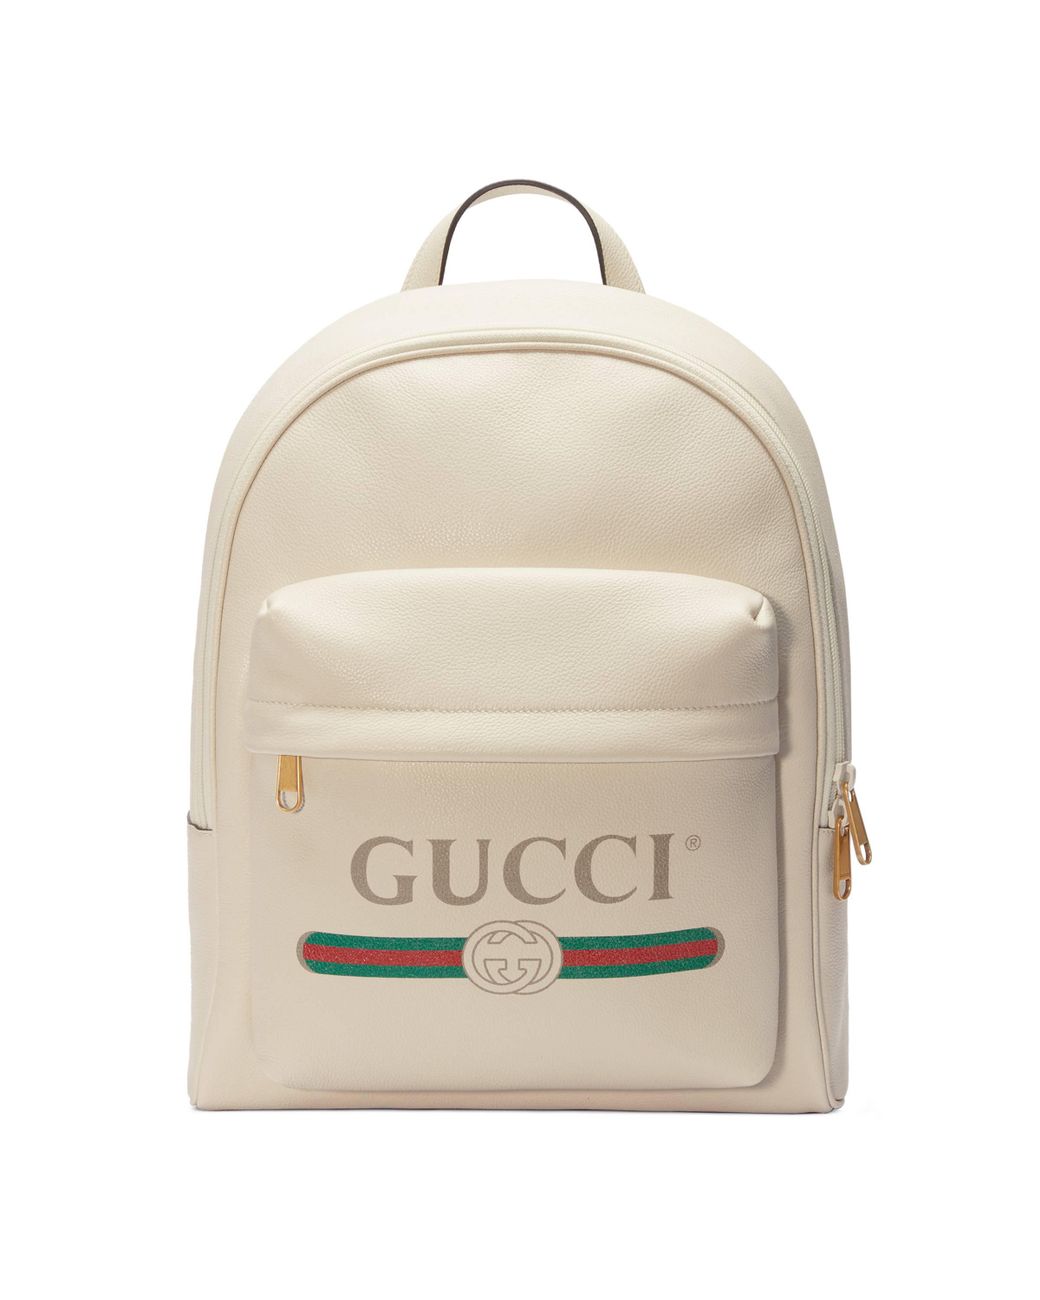 Perle passager besøgende Gucci Print Leather Backpack in White | Lyst